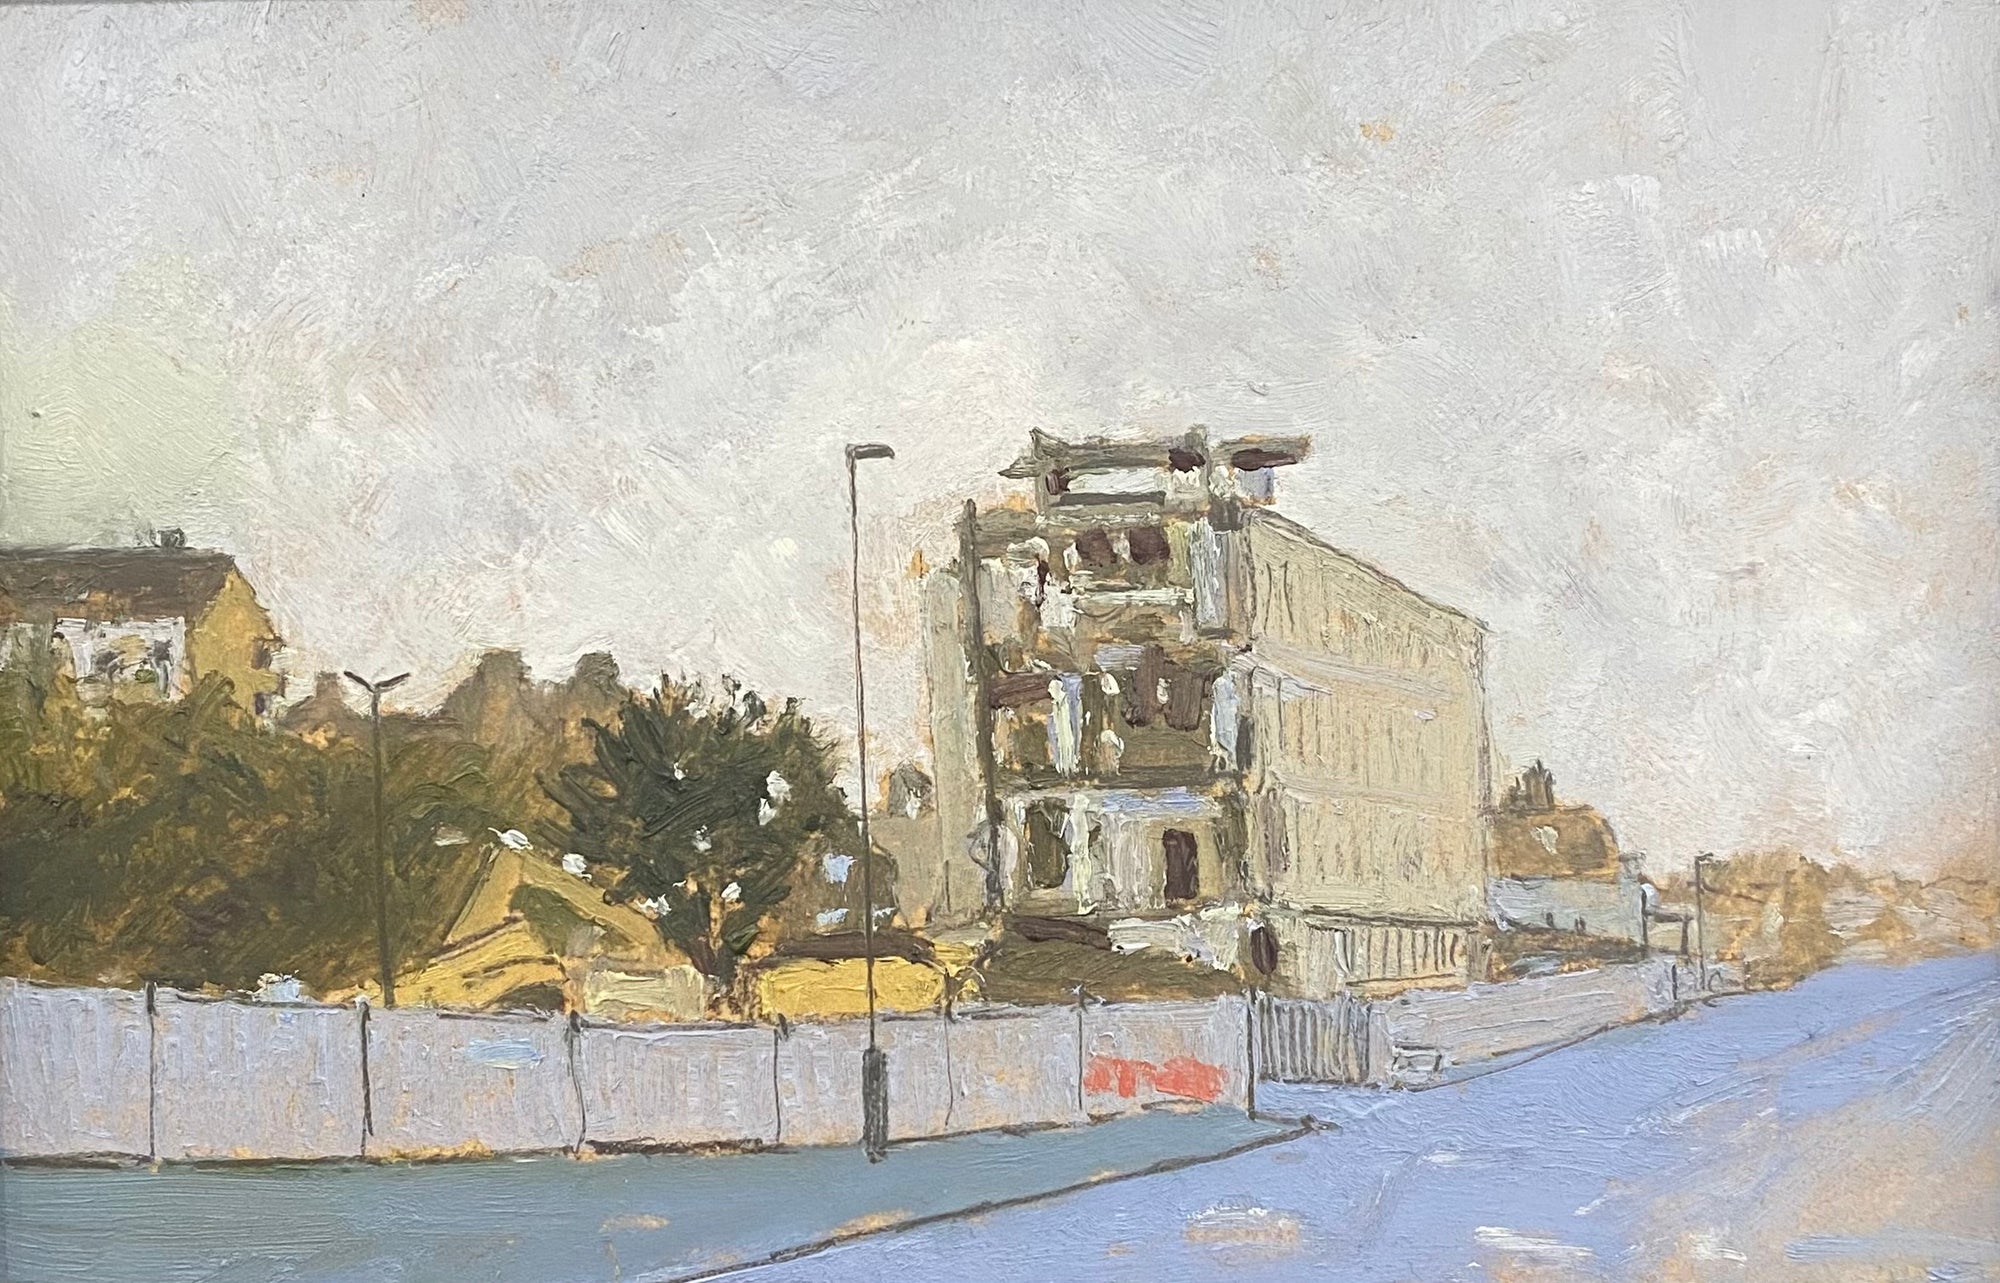 Stephen Bithell - The Demolition of Weymouth Council Buildings